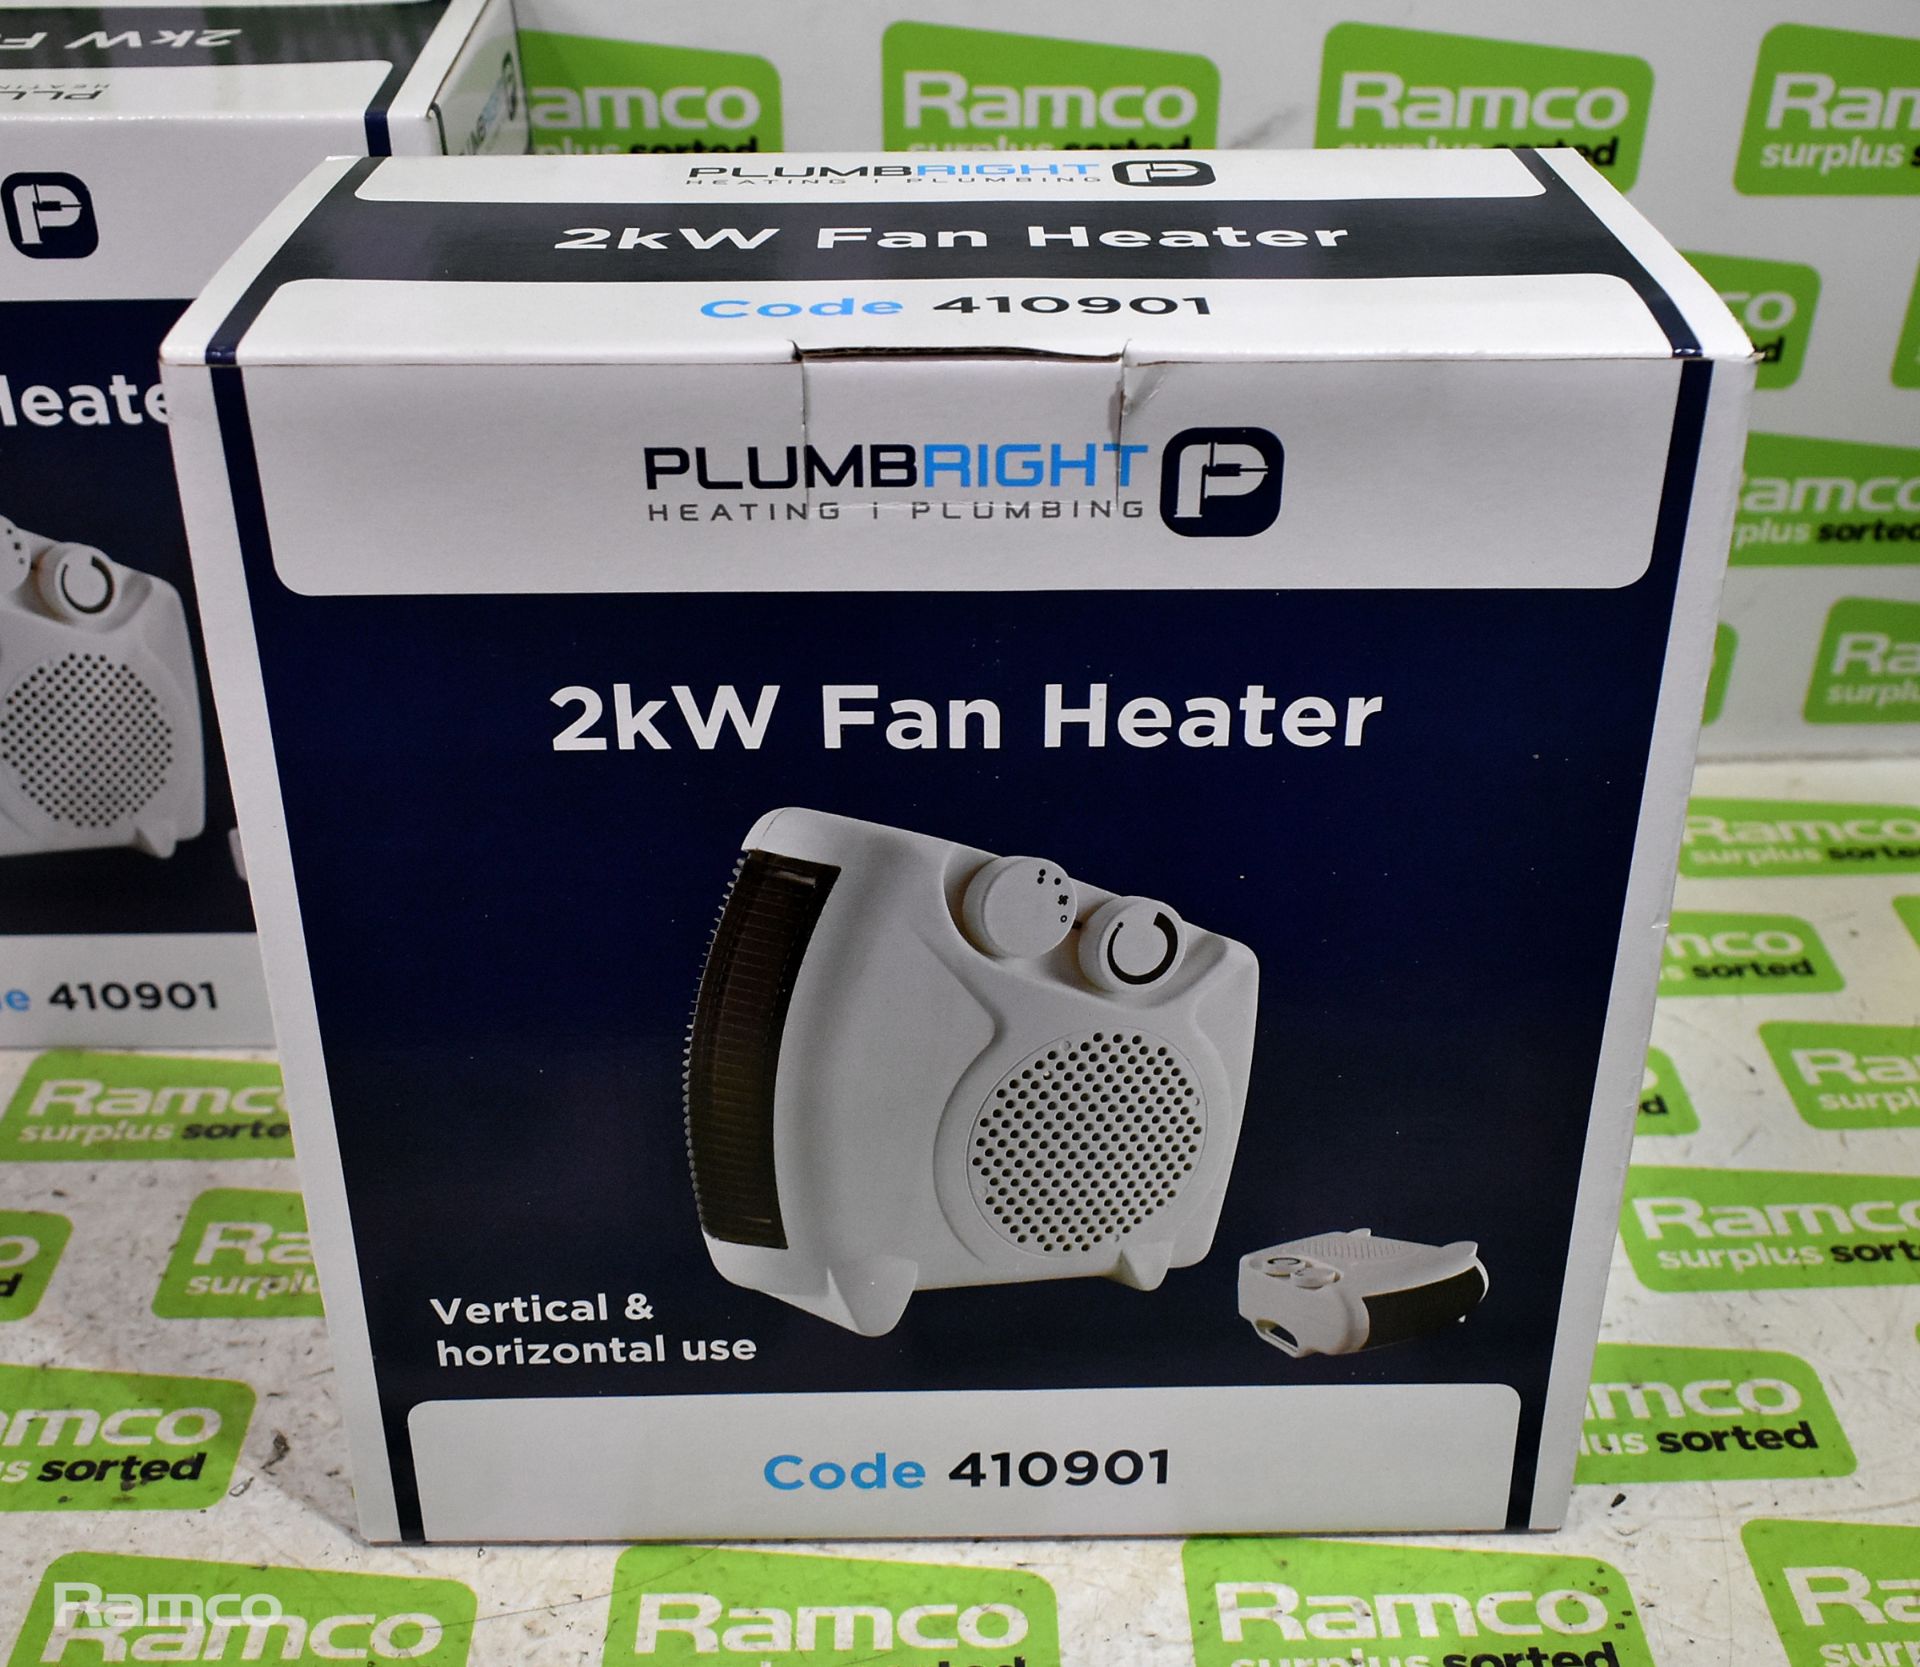 3x Plumbright 2kW fan heaters – product number 410901 - Image 6 of 6